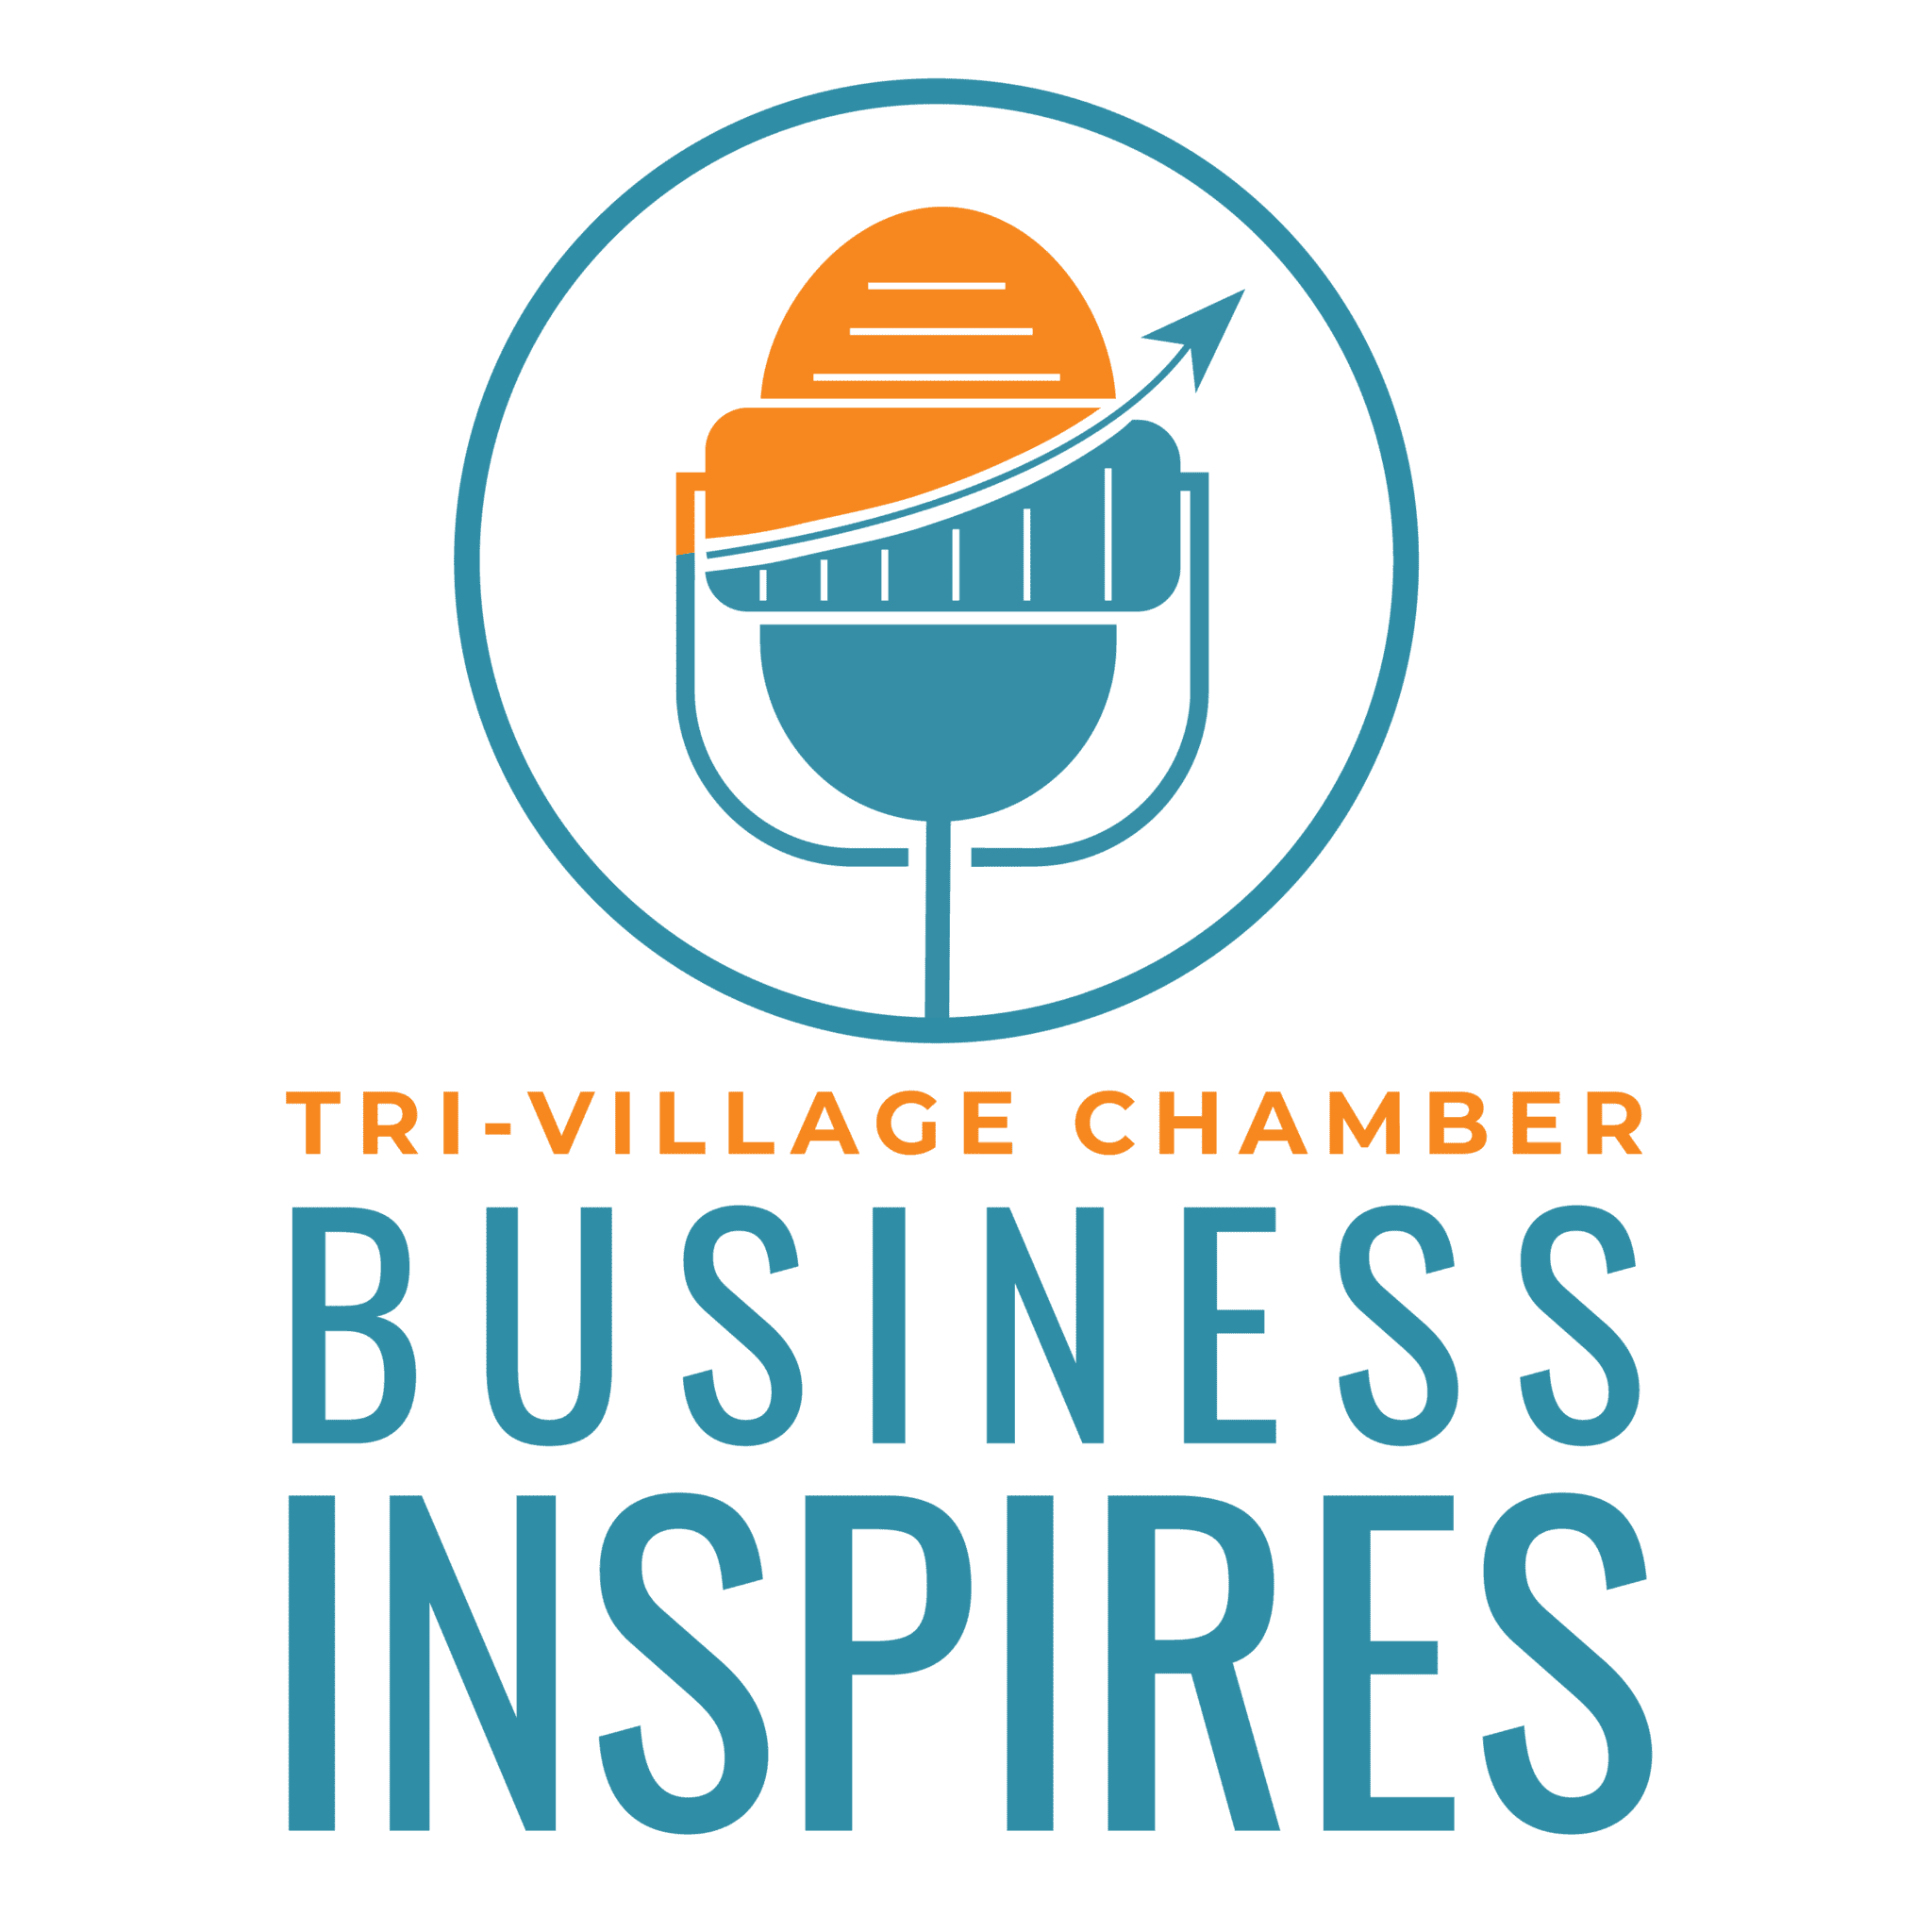 Business Inspires Podcast from Tri-Village Chamber Partnership